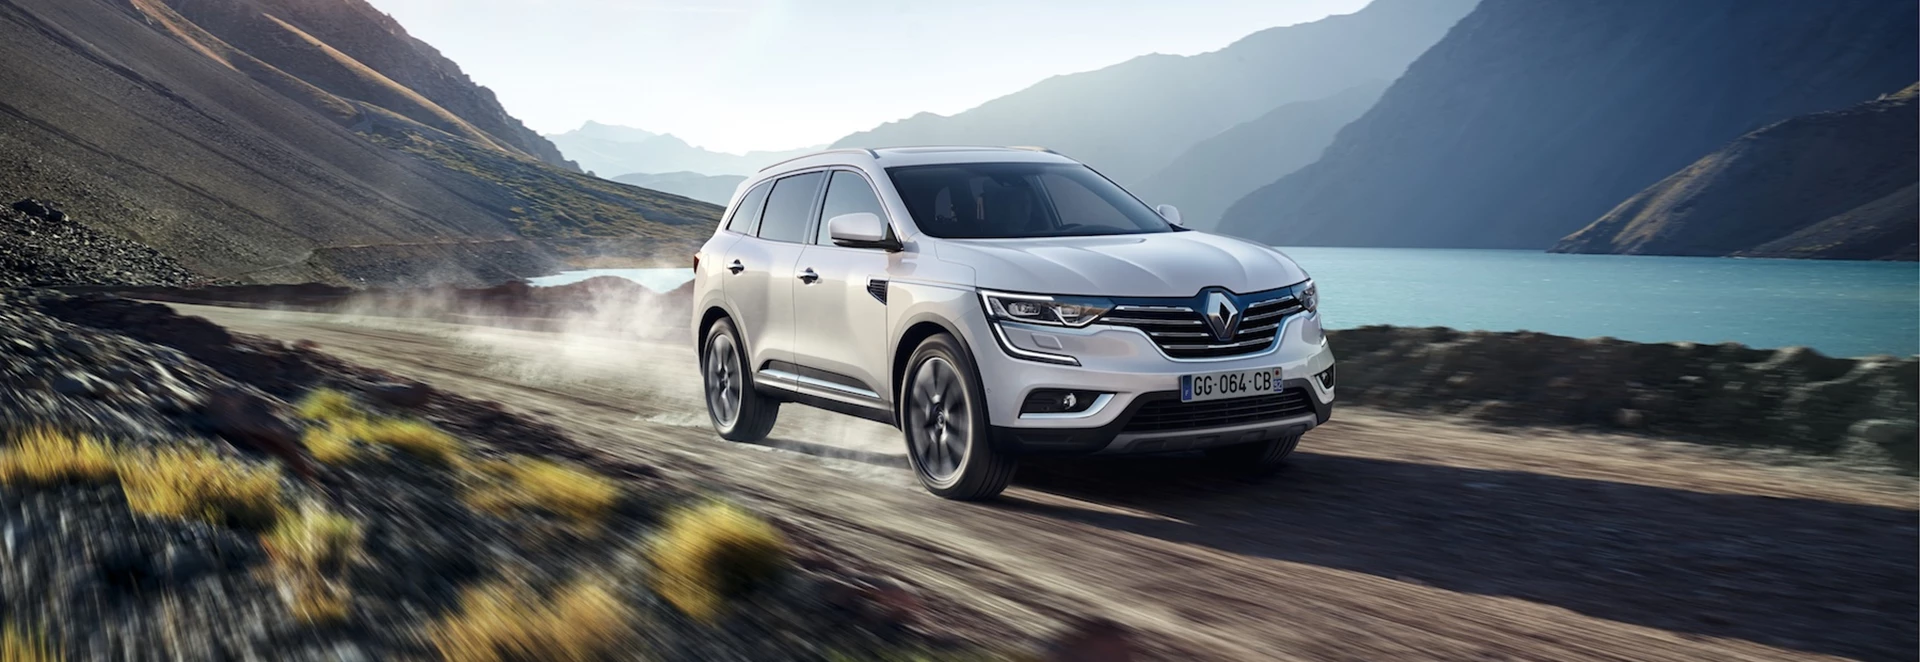 Renault’s Koleos receives a five-star safety rating 